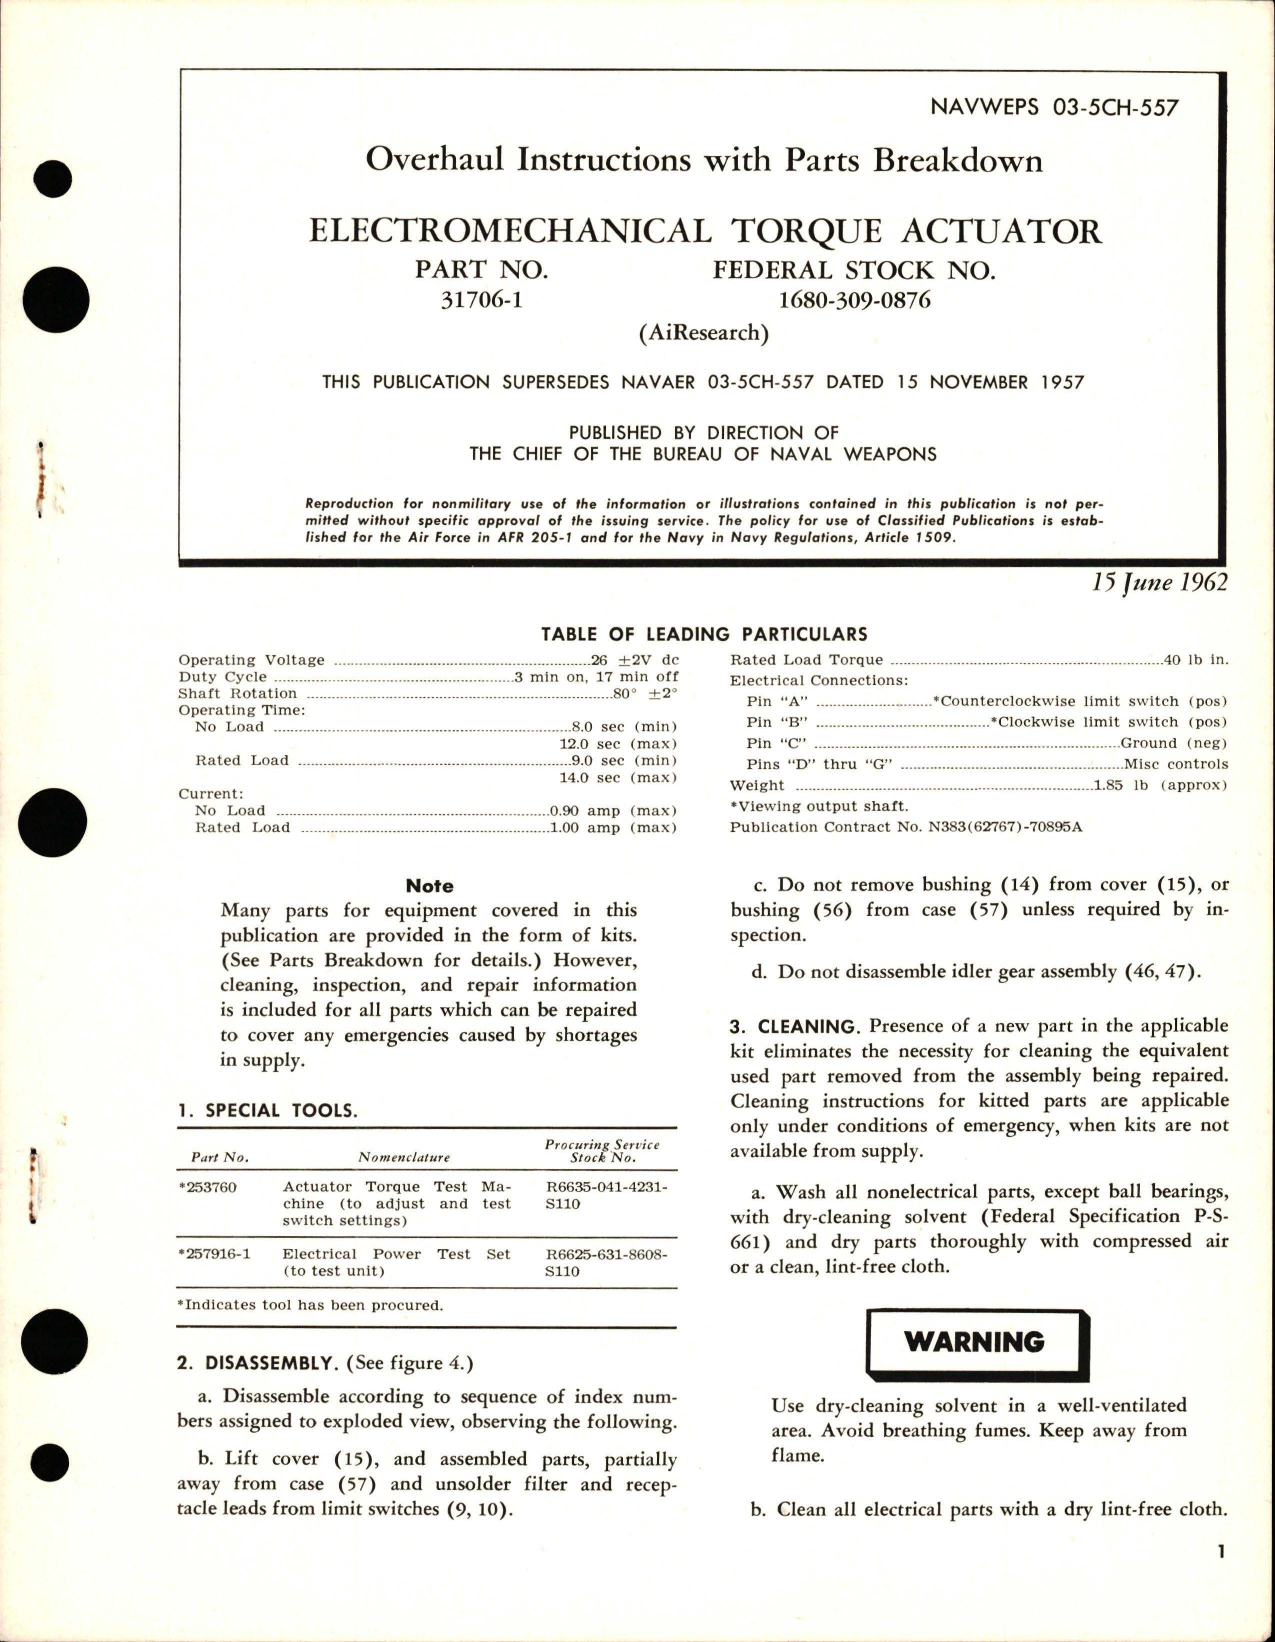 Sample page 1 from AirCorps Library document: Overhaul Instructions with Parts Breakdown for Electromechanical Torque Actuator - Part 31706-1